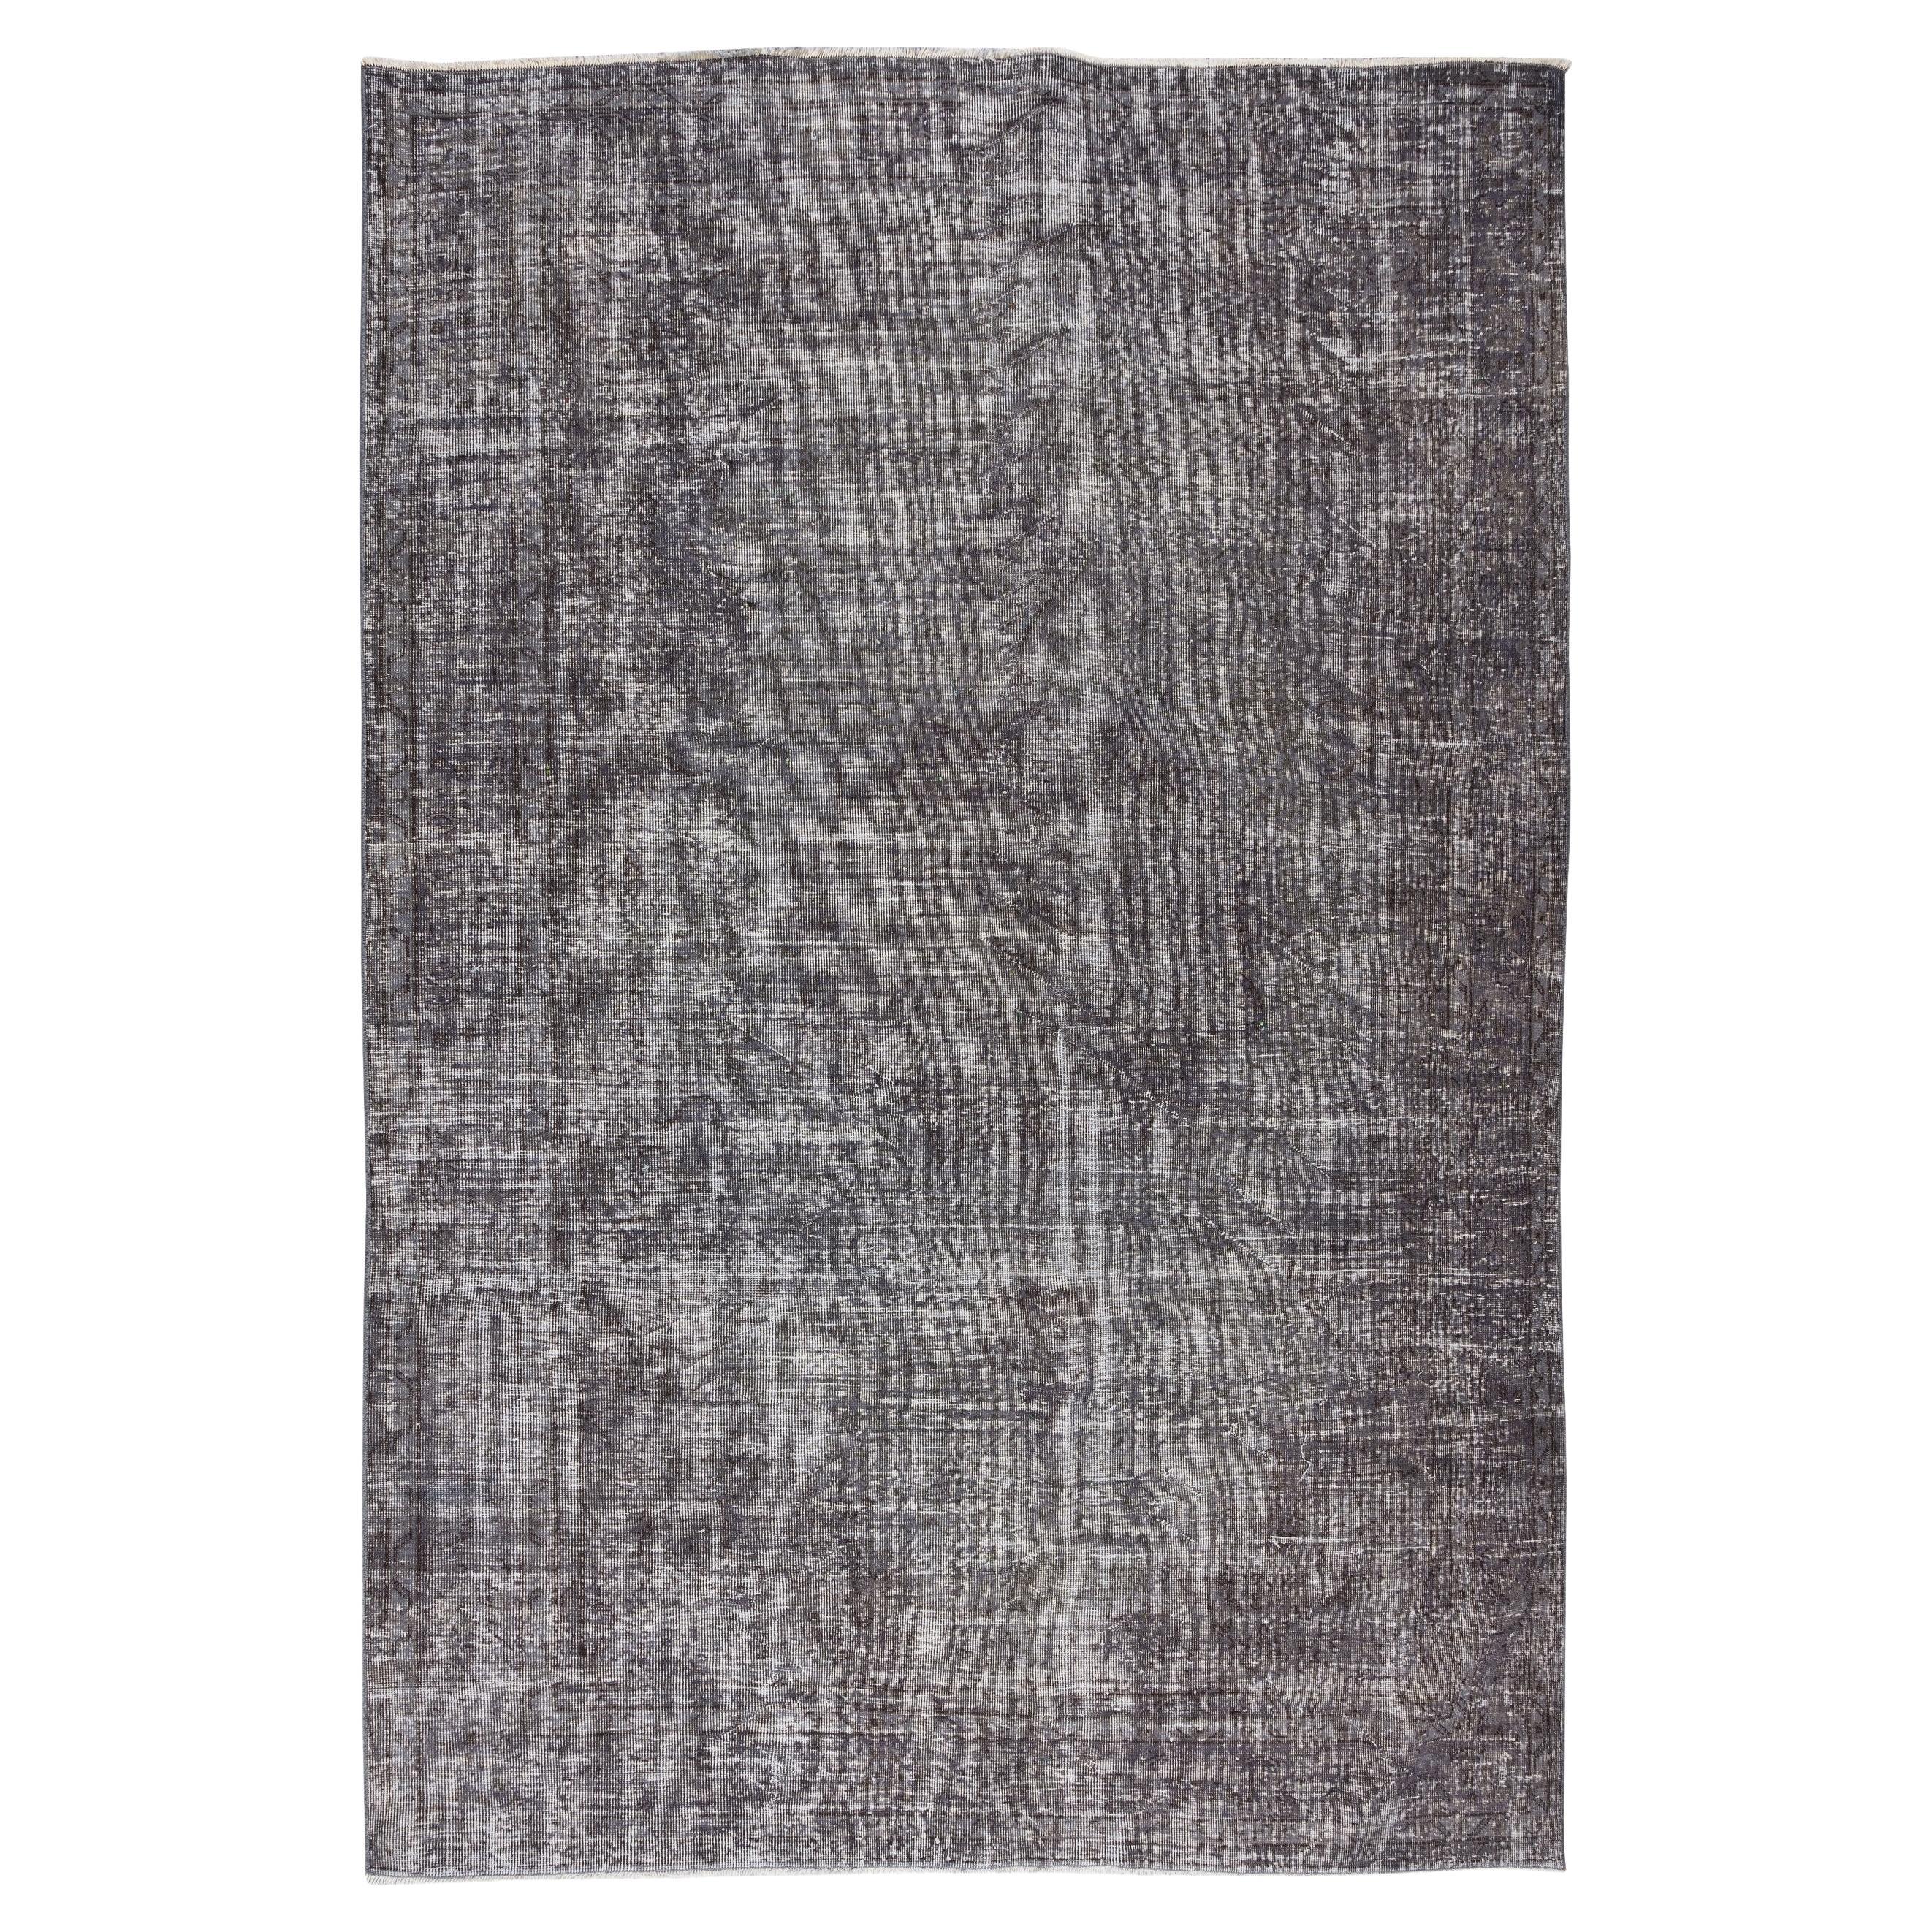 7x10 Ft Vintage Hand-Knotted Turkish Rug Over-Dyed in Gray for Modern Interior For Sale